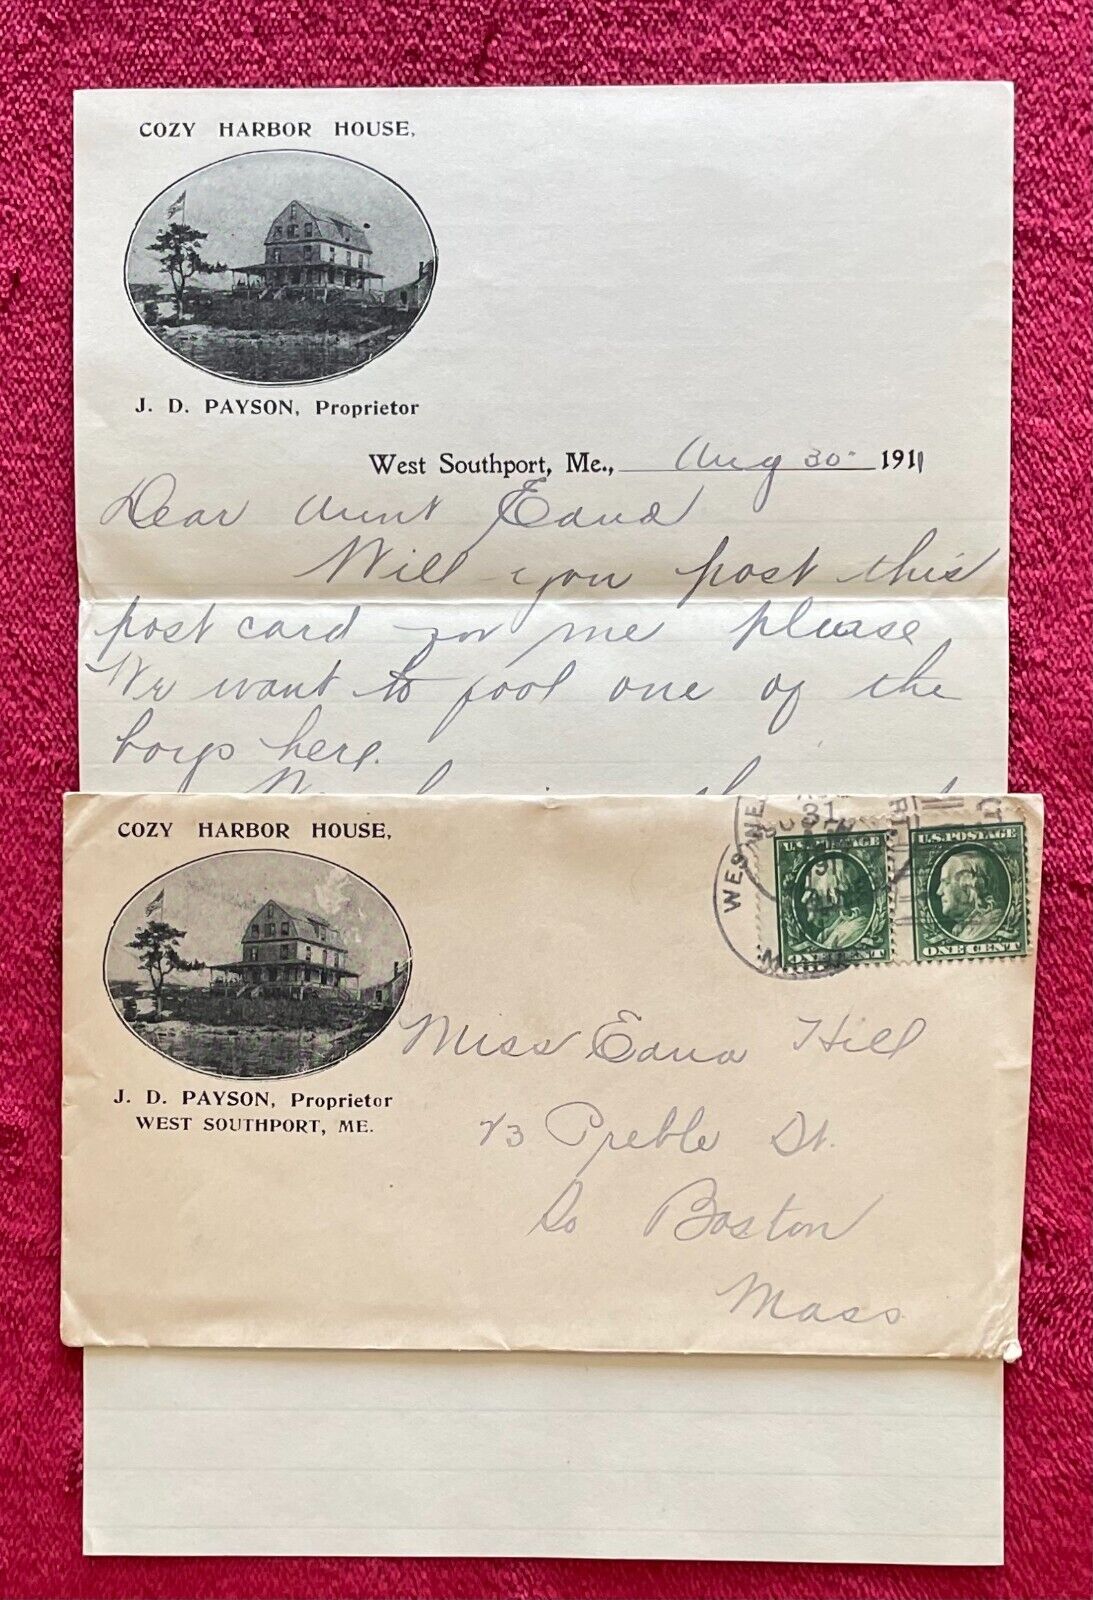 COZY HARBOR HOUSE WEST SOUTHPORT MAINE - 1911 COVER & LETTER